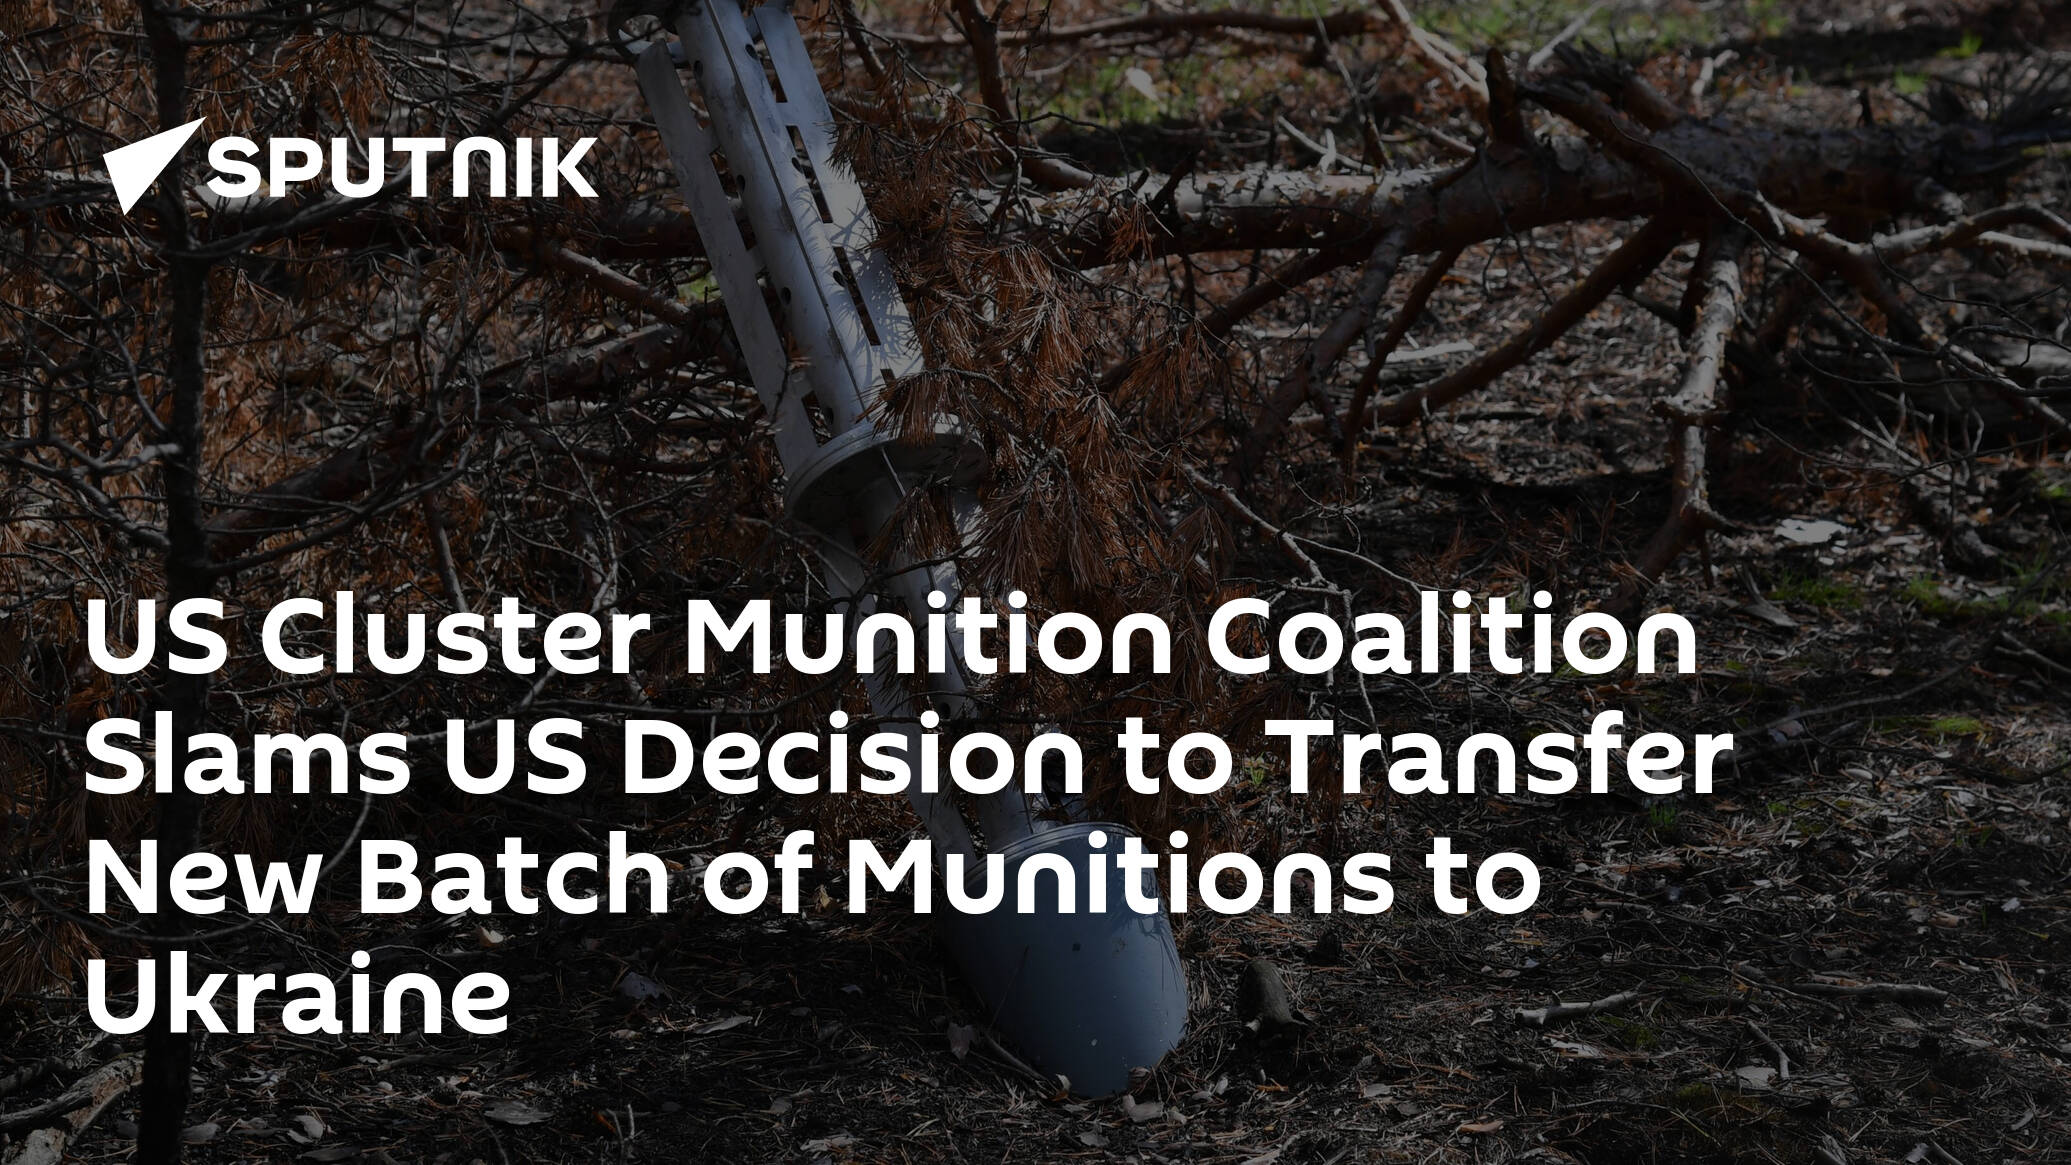 US Cluster Munition Coalition Slams US Decision to Transfer New Batch of Munitions to Ukraine